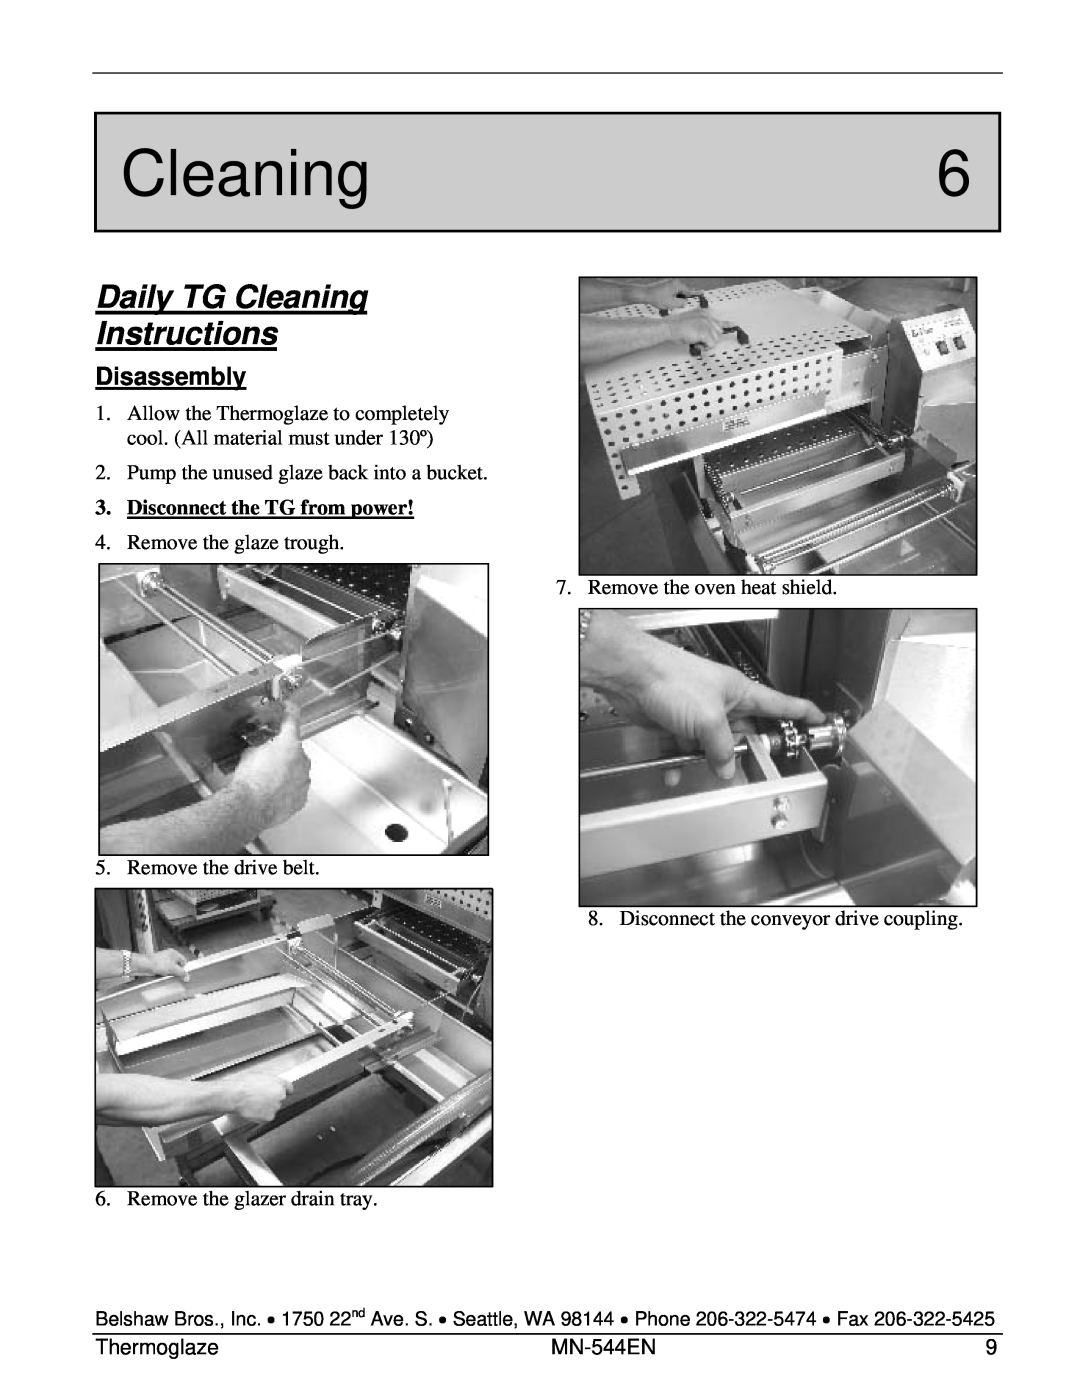 Belshaw Brothers TG 50 manual Cleaning6, Daily TG Cleaning Instructions, Disassembly 